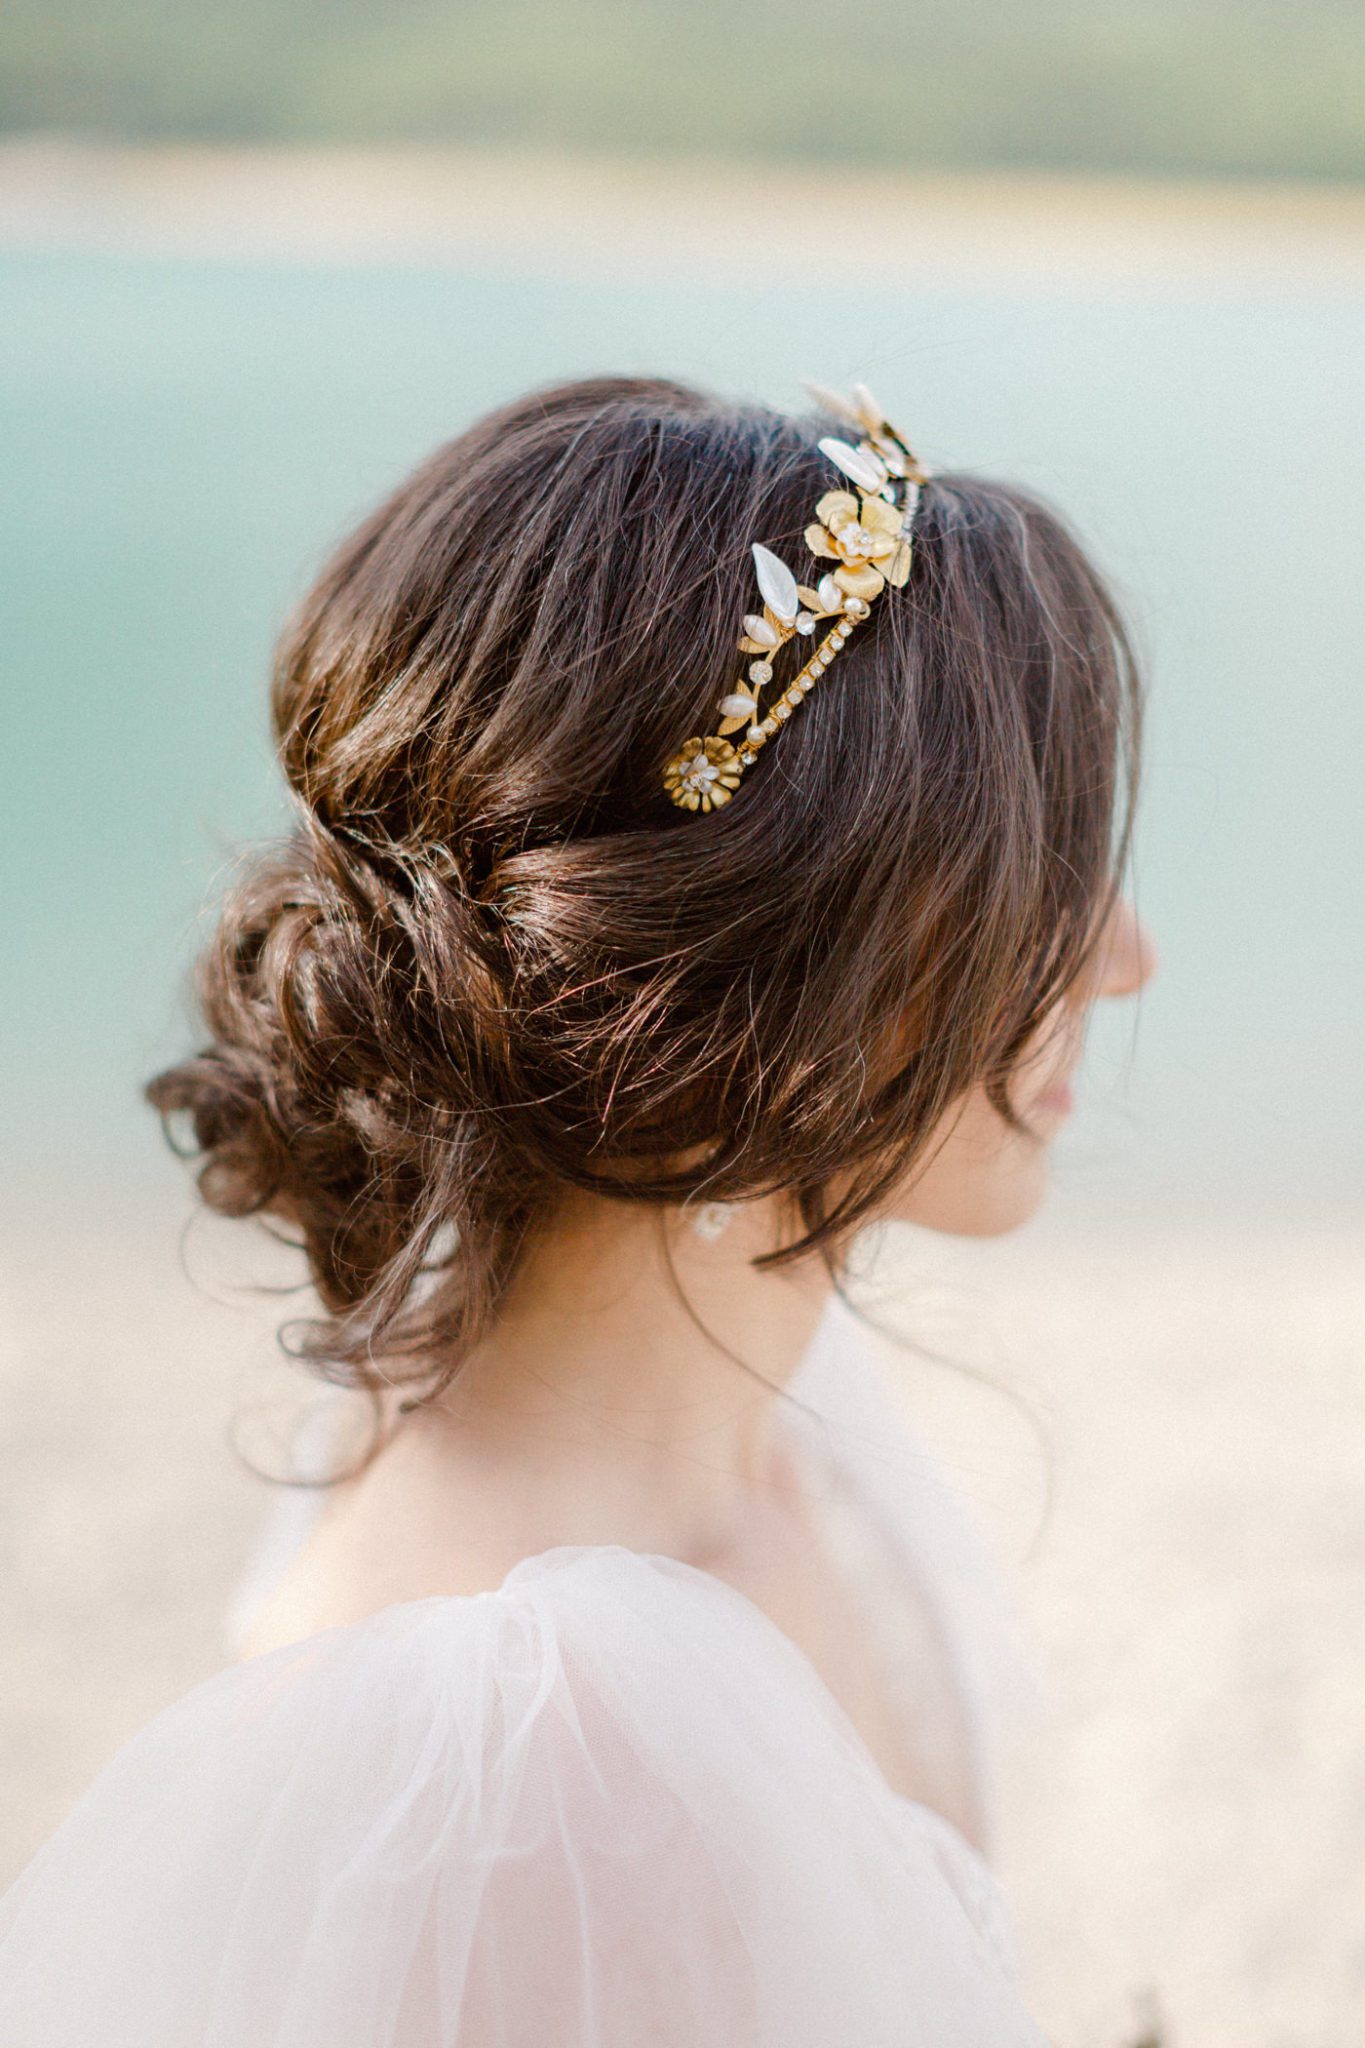 Gold bridal hair accessories with a romantic bridal updo